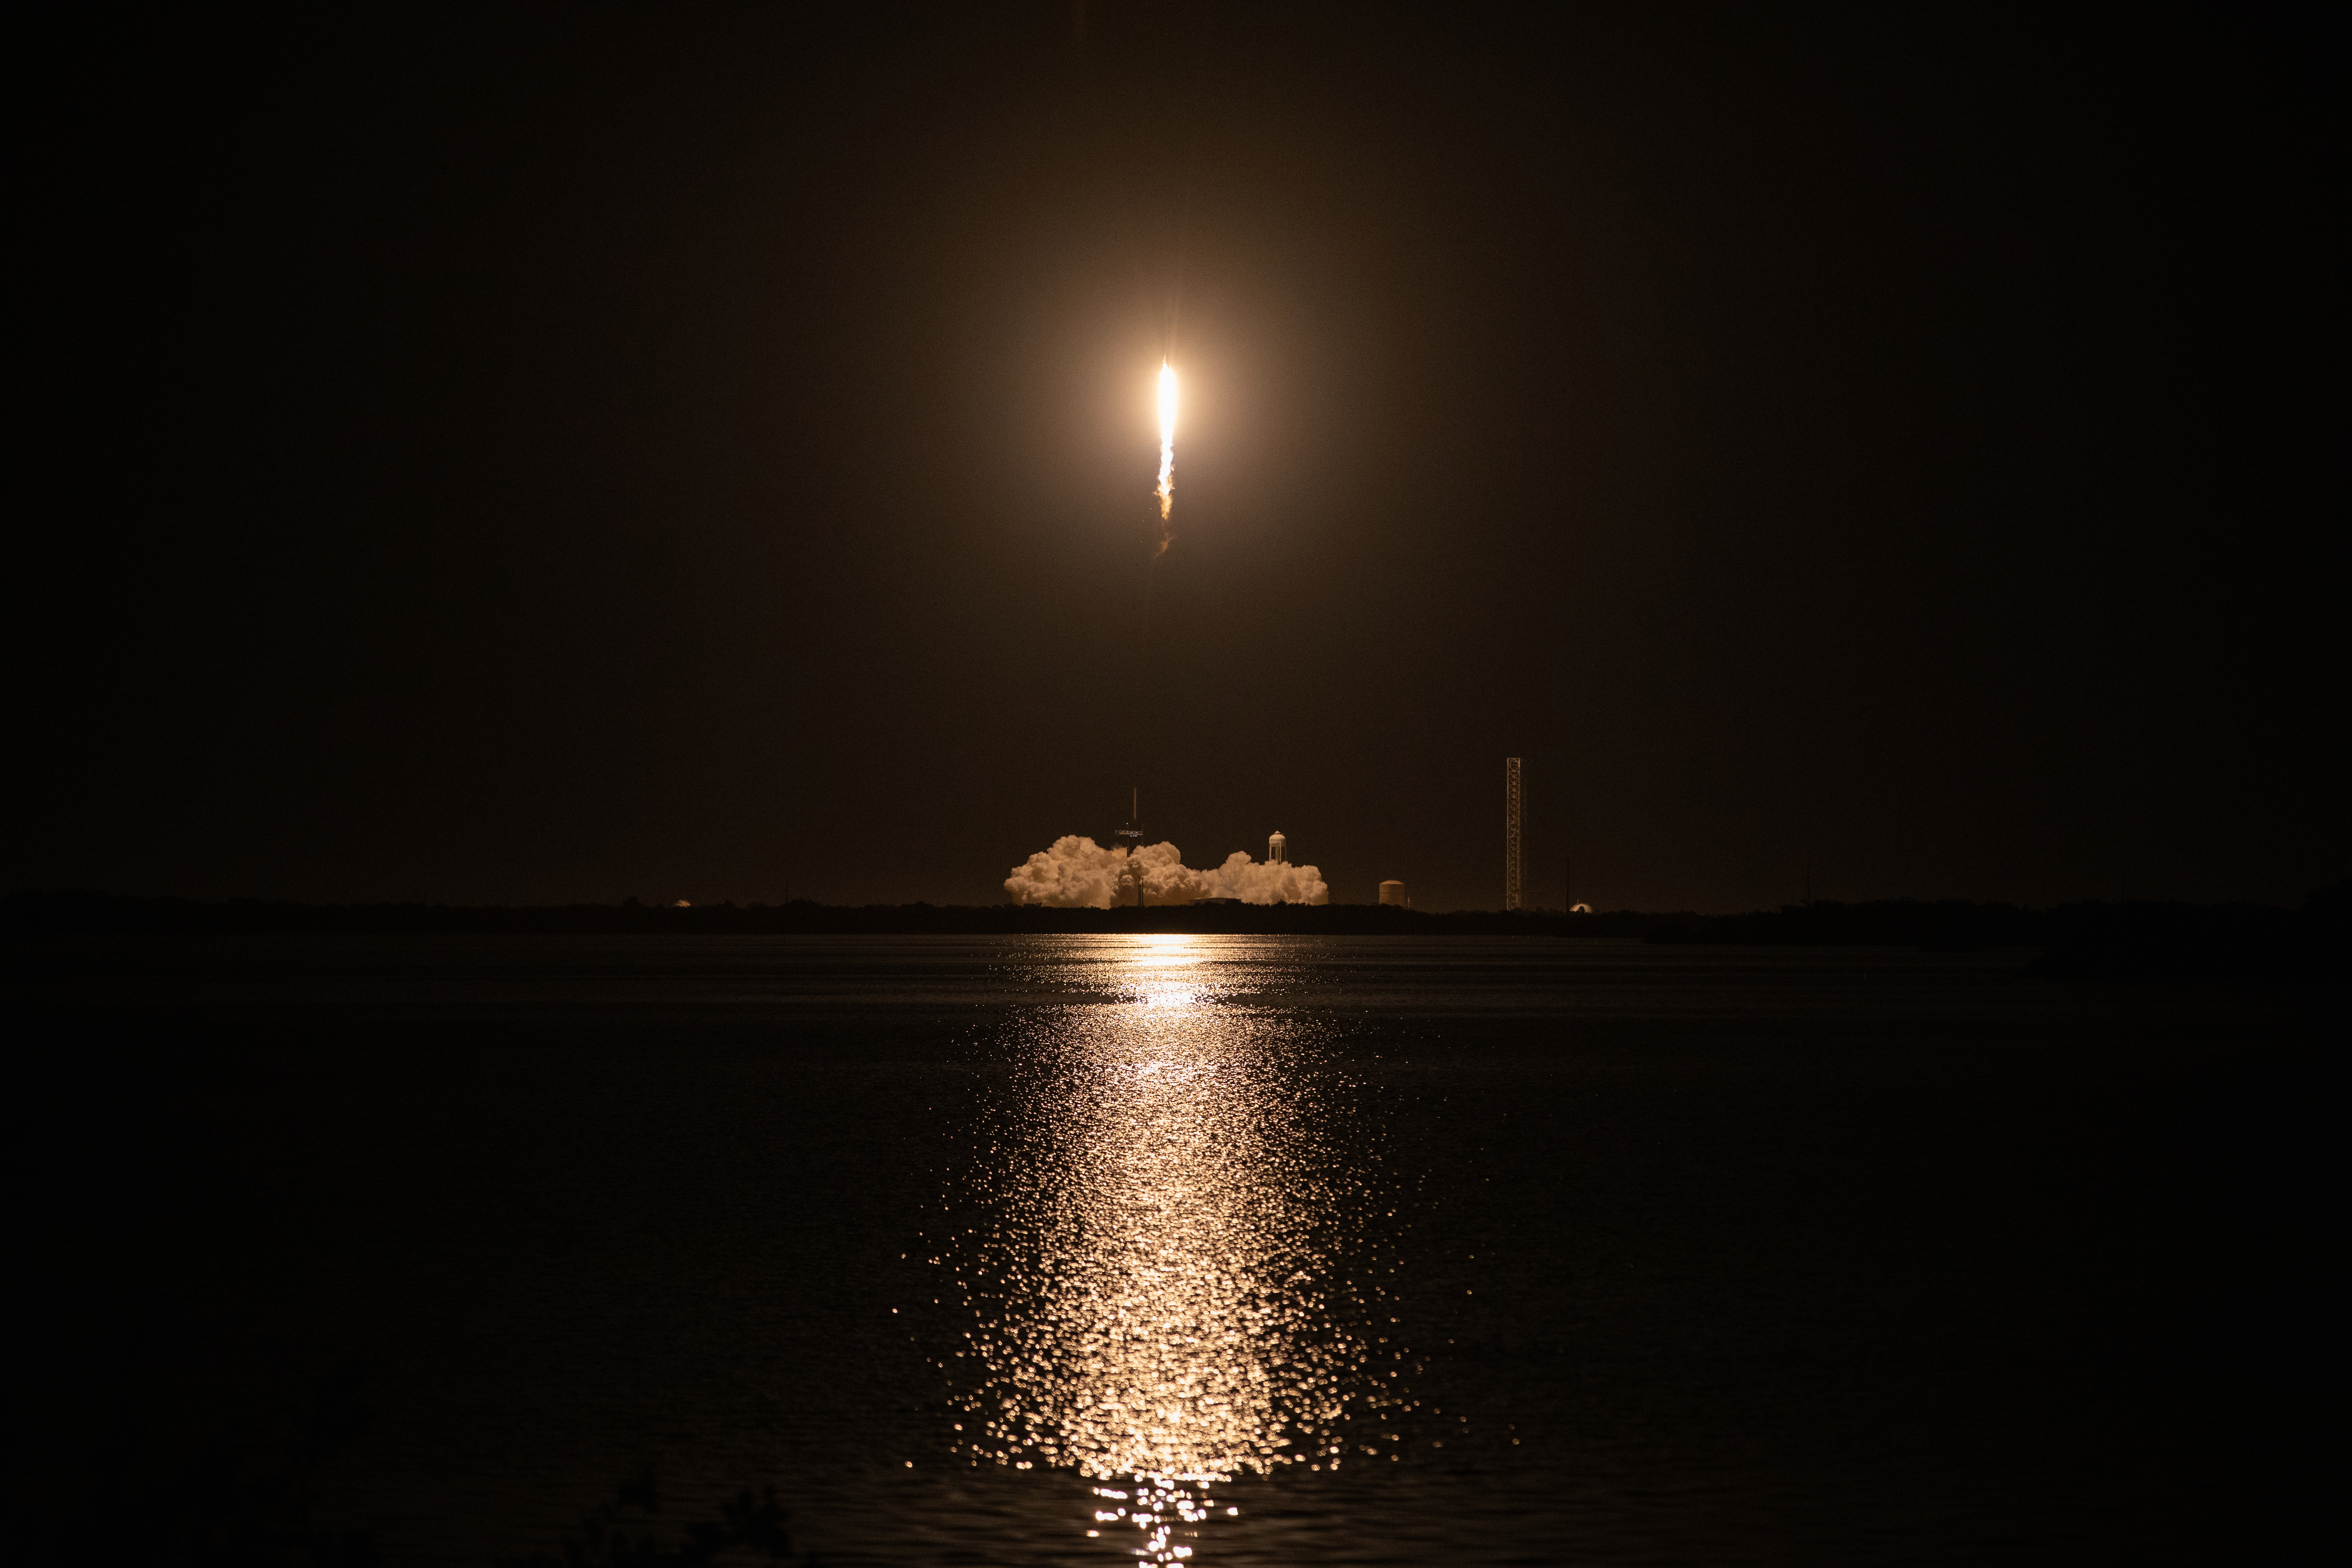 SpaceX's Cargo Dragon launches from Launch Complex 39A at NASA's Kennedy Space Center in Florida in its 29th commercial resupply mission. The rocket's engines are glowing brightly as it takes off through the dark night sky, and the light illuminates the water below.